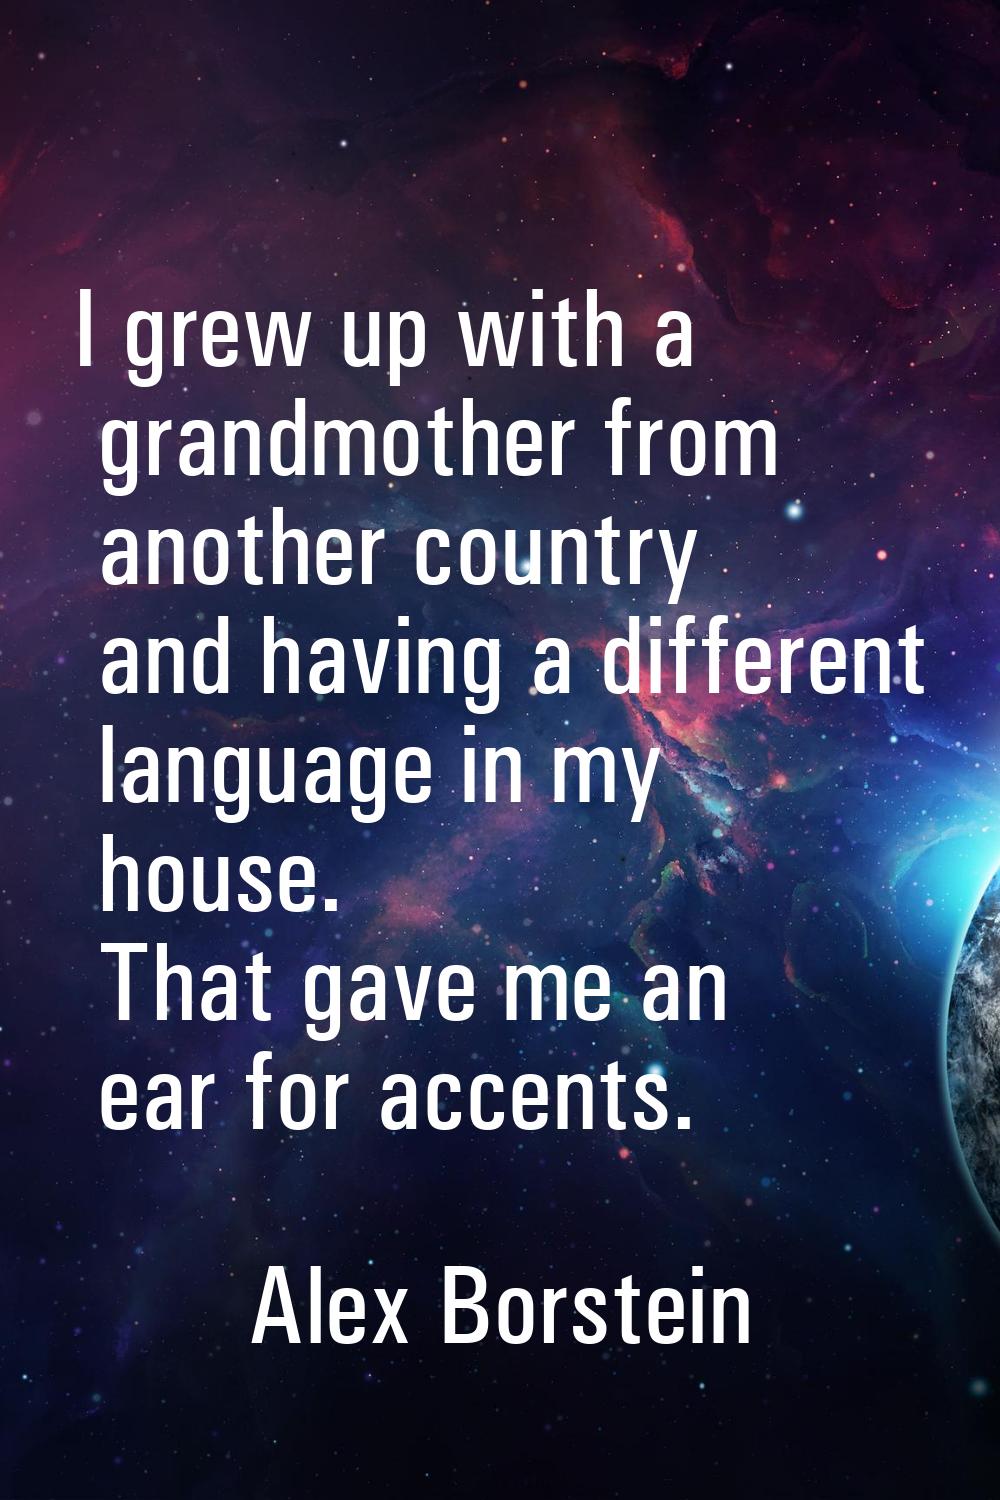 I grew up with a grandmother from another country and having a different language in my house. That